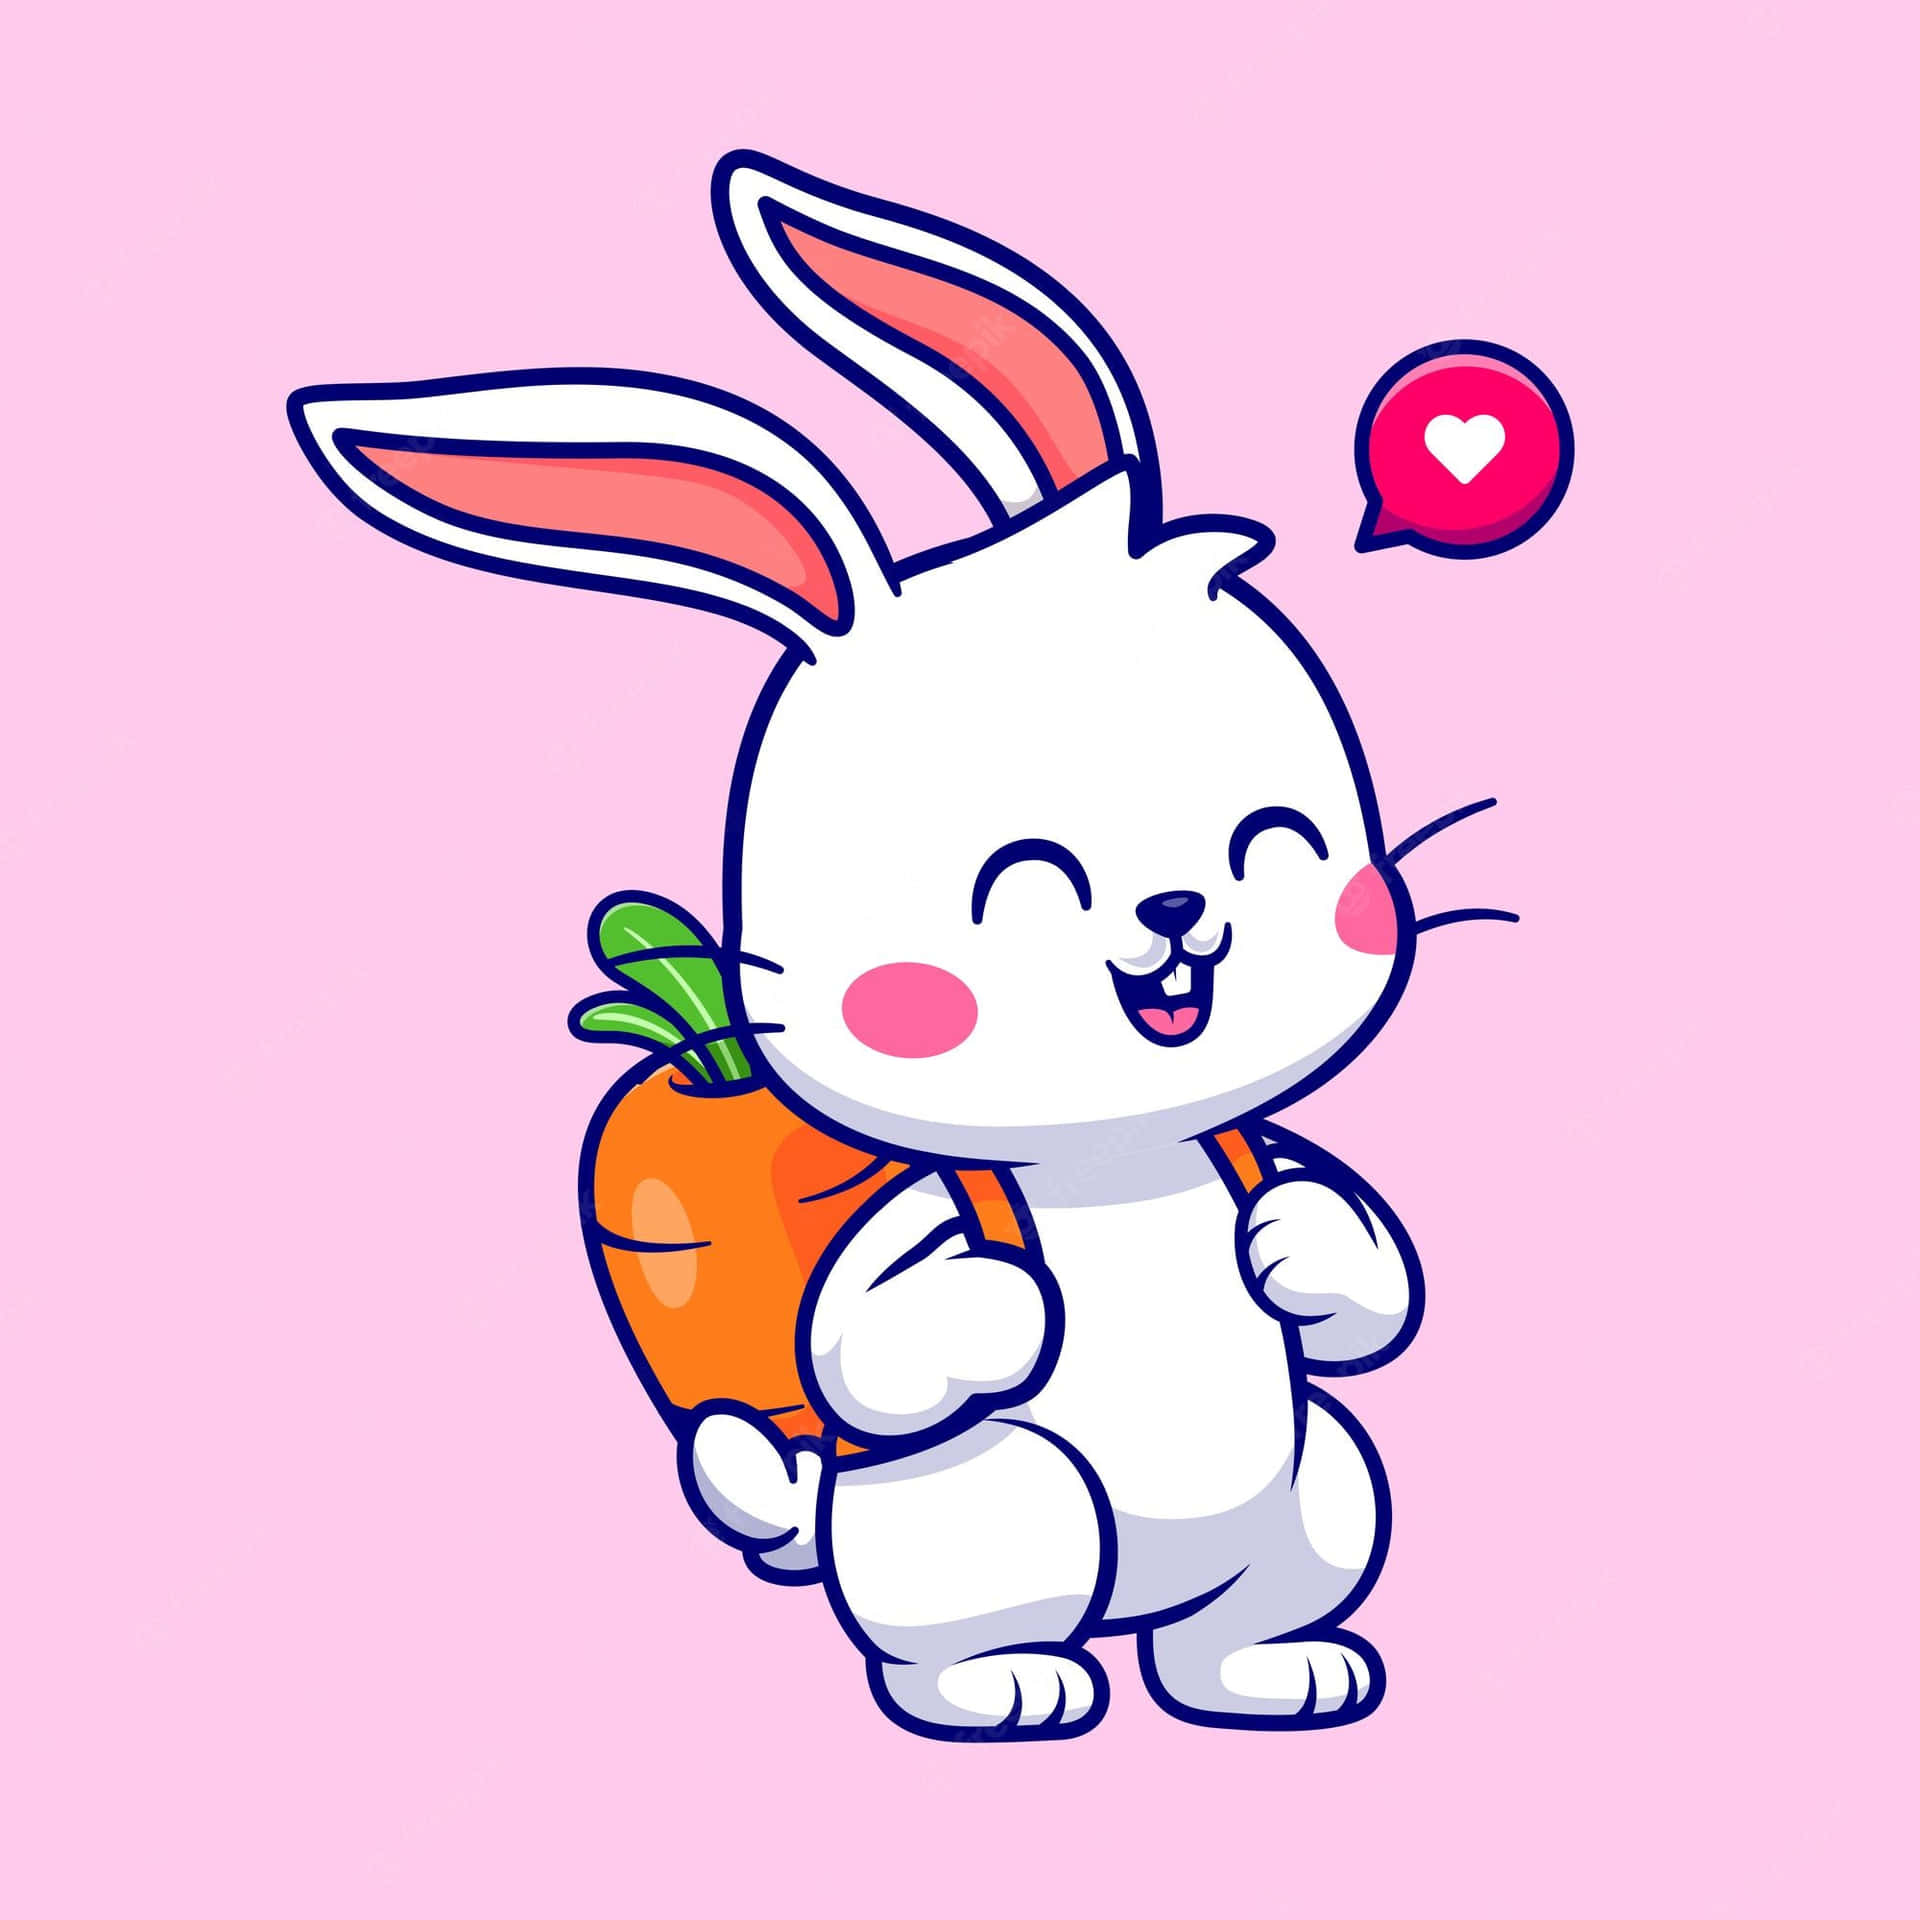 Cute Animated Rabbit Pictures